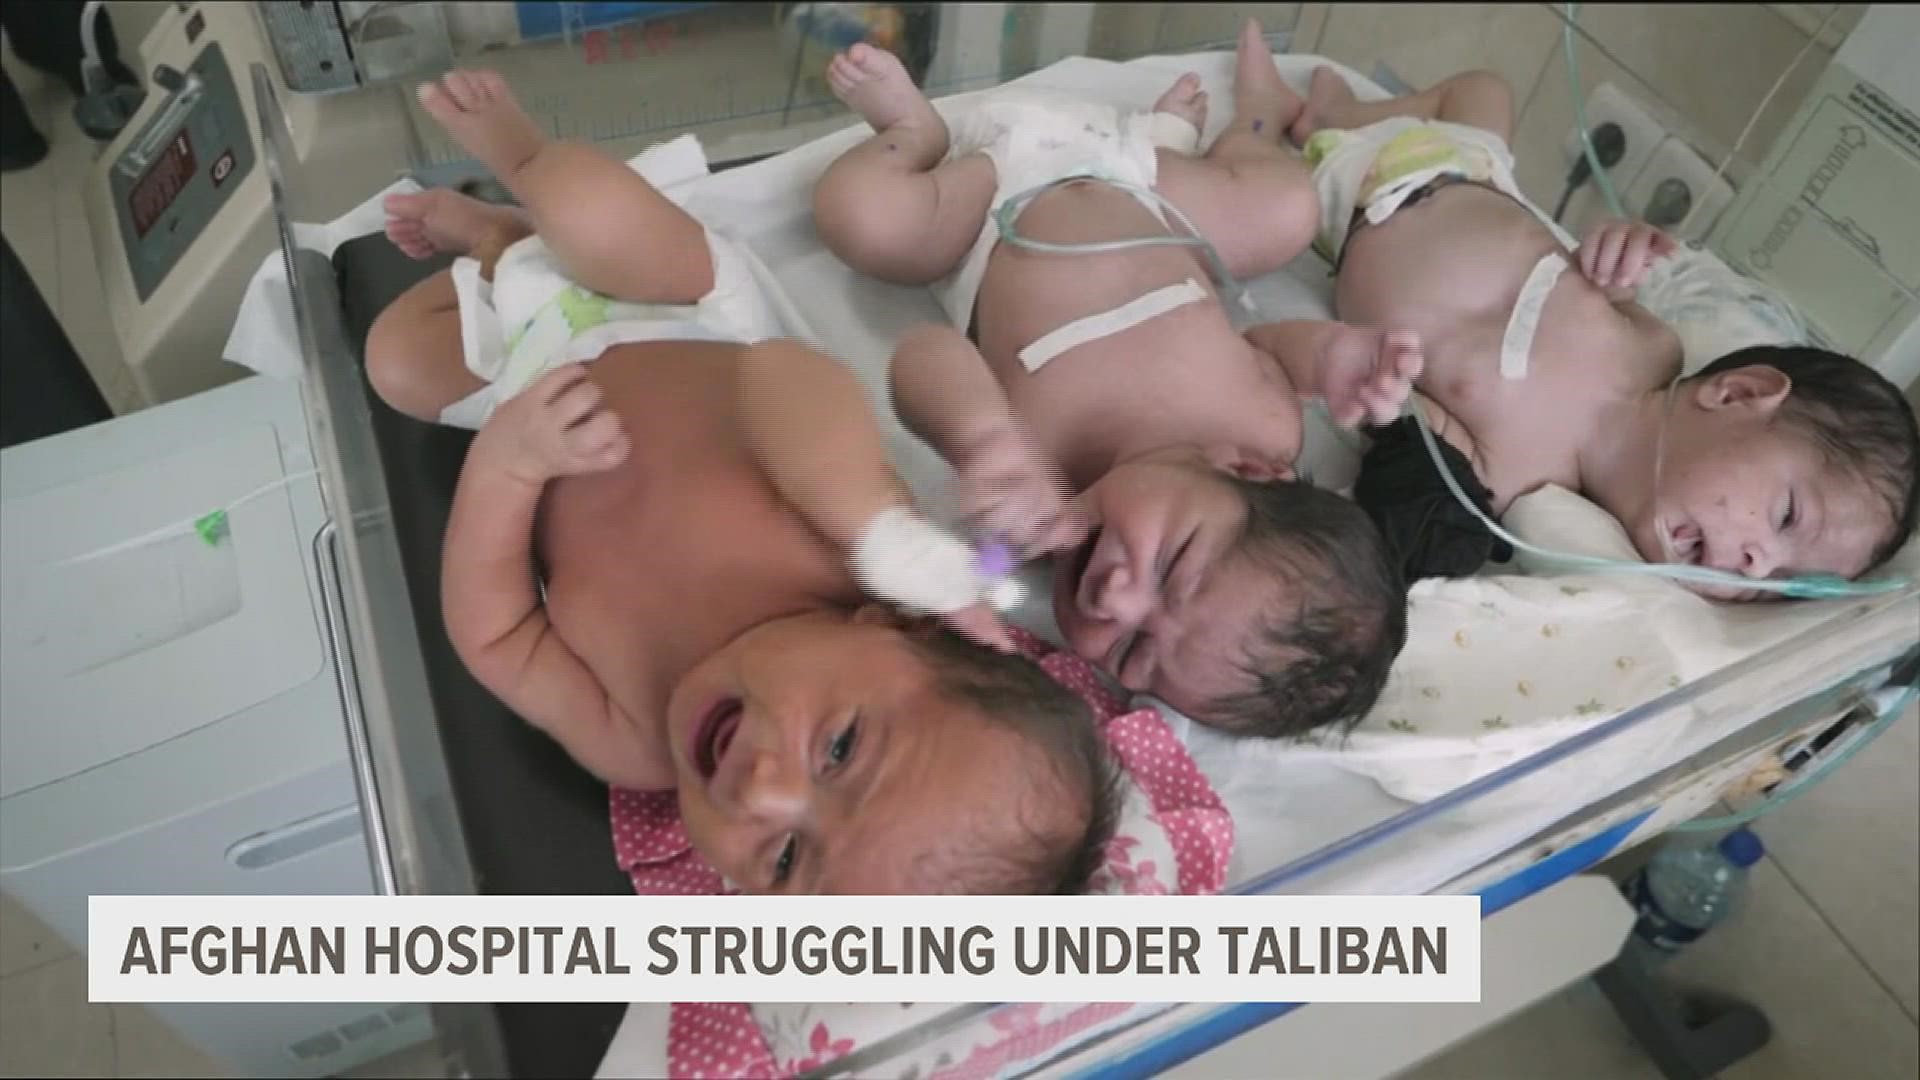 A year after the Taliban regime regained control of Afghanistan, the effects are being felt across the country as millions go hungry and hospitals struggle.